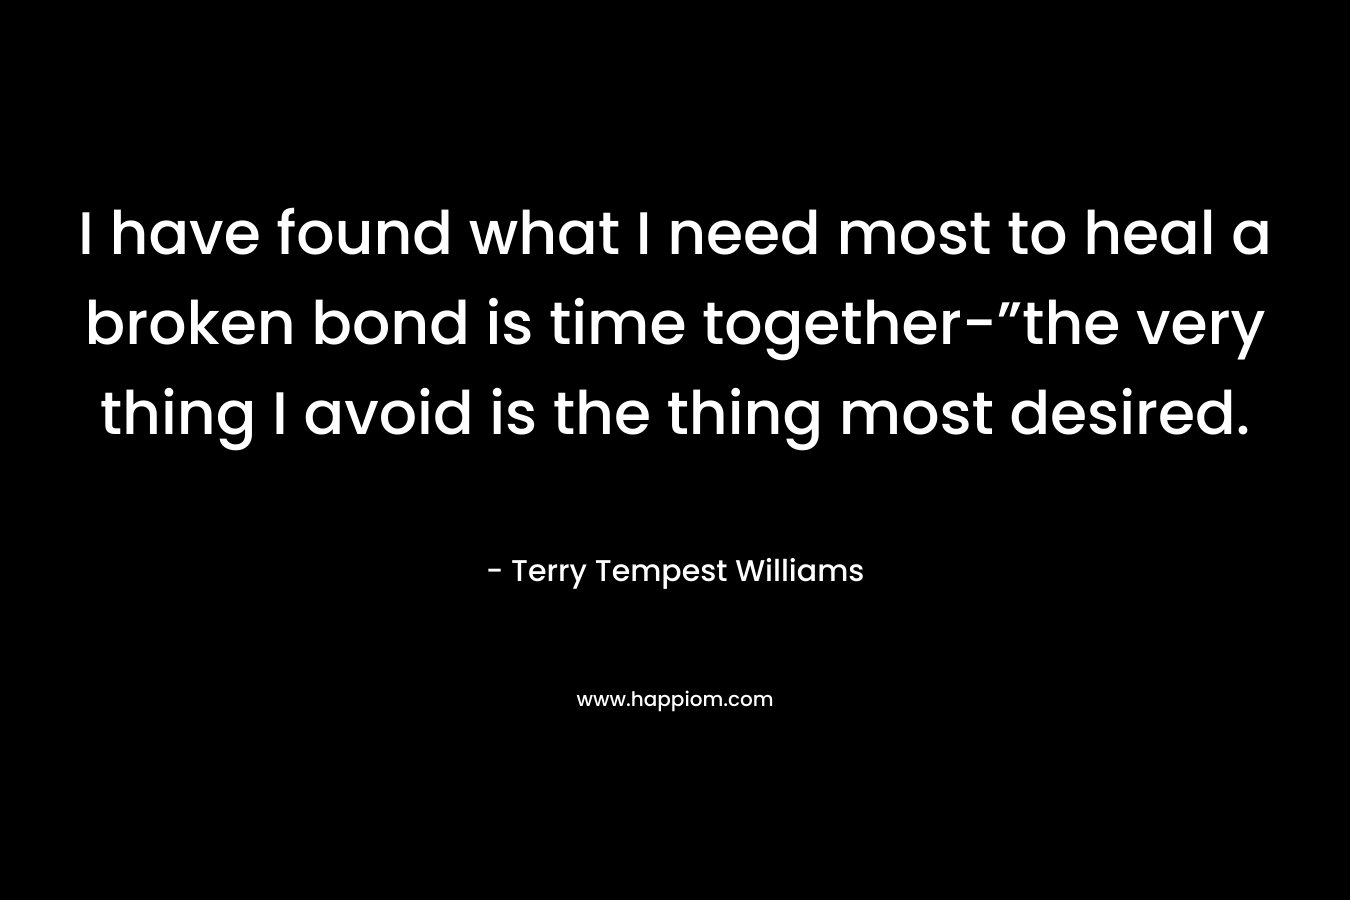 I have found what I need most to heal a broken bond is time together-”the very thing I avoid is the thing most desired. – Terry Tempest Williams